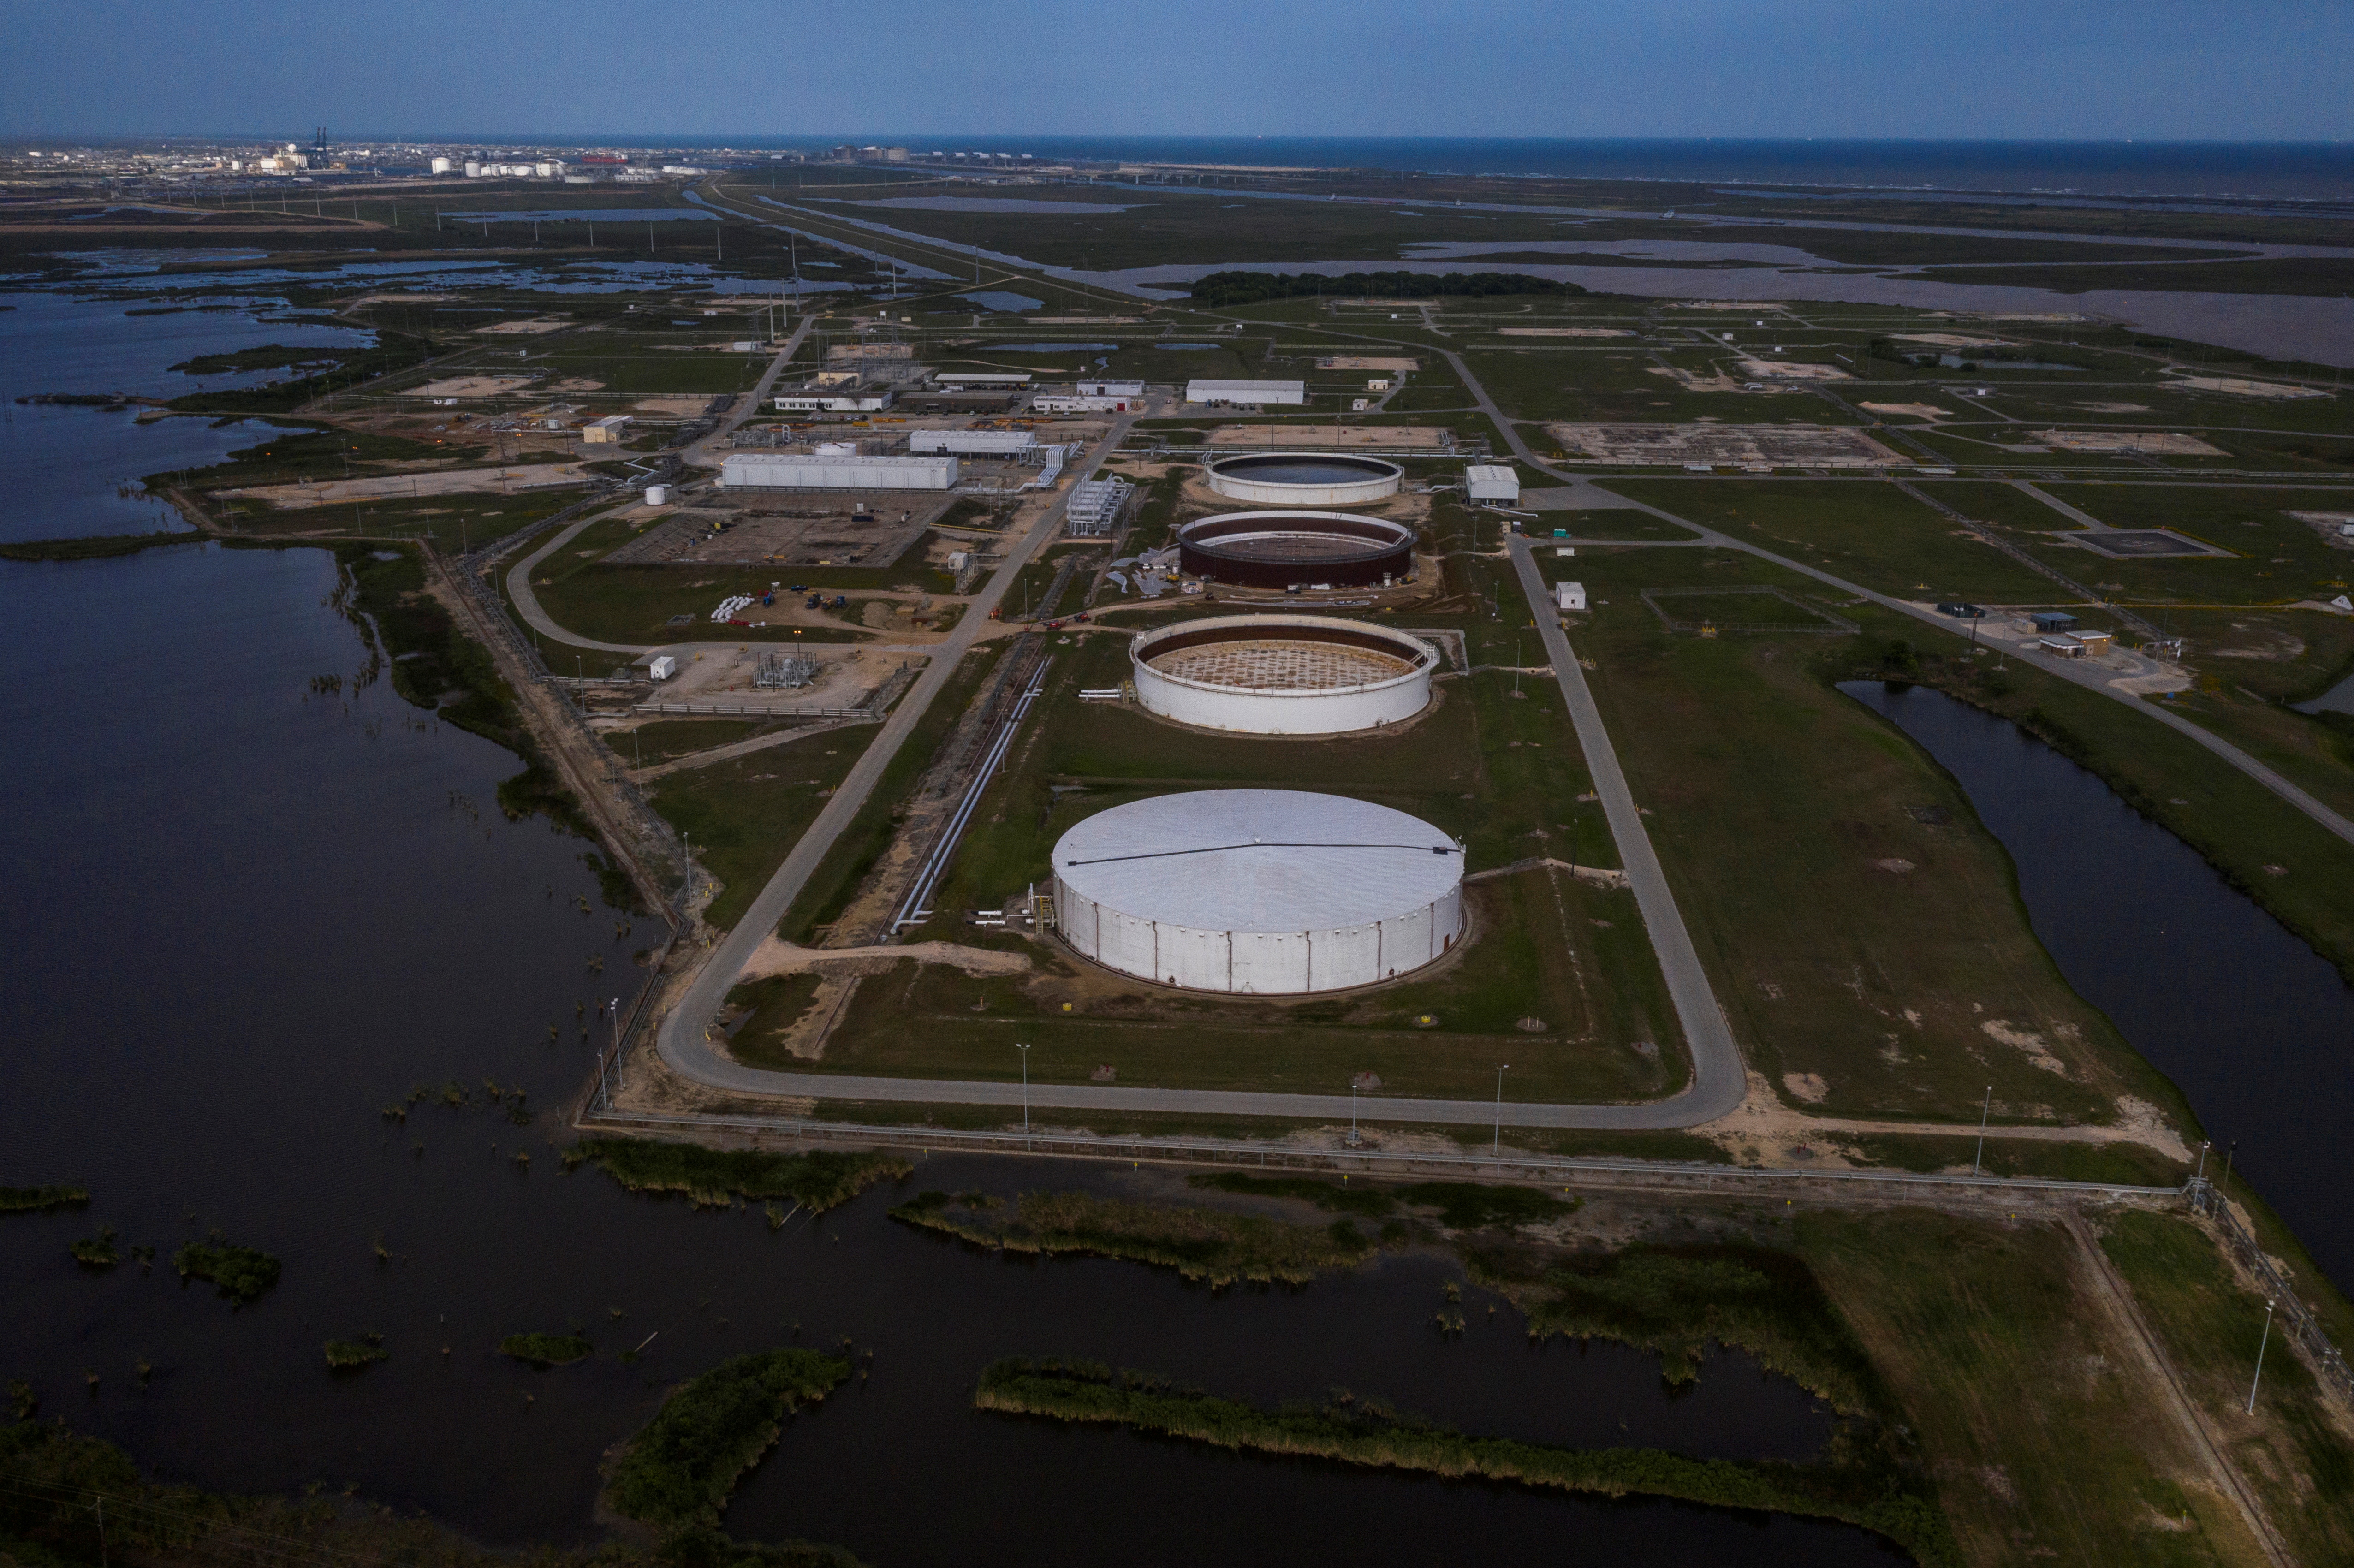 The Bryan Mound Strategic Petroleum Reserve, an oil storage facility, is seen in this aerial photograph over Freeport, Texas, U.S., April 27, 2020. REUTERS/Adrees Latif